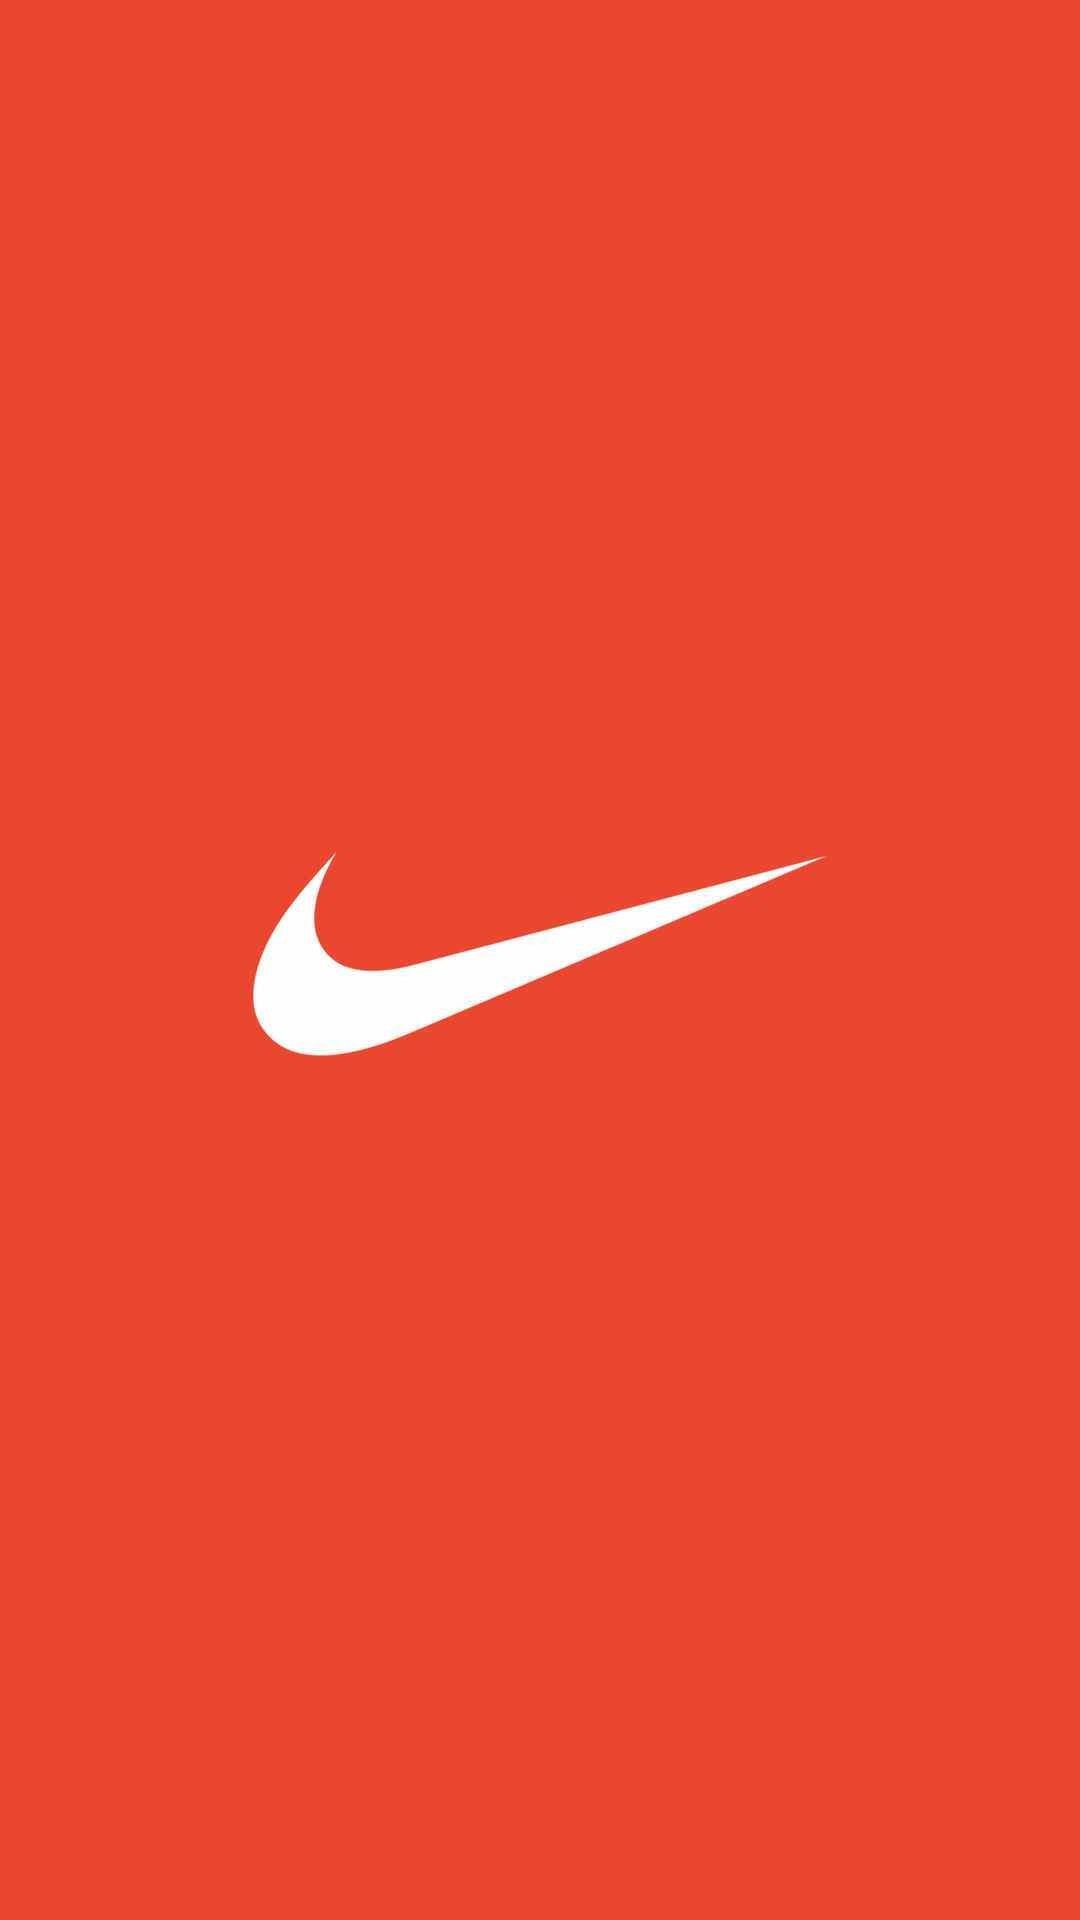 Nike Wallpaper for iPhone, iPhone, Desktop HD Background / Wallpaper (1080p, 4k) HD Wallpaper (Desktop Background / Android / iPhone) (1080p, 4k) (1080x1920) (2021)